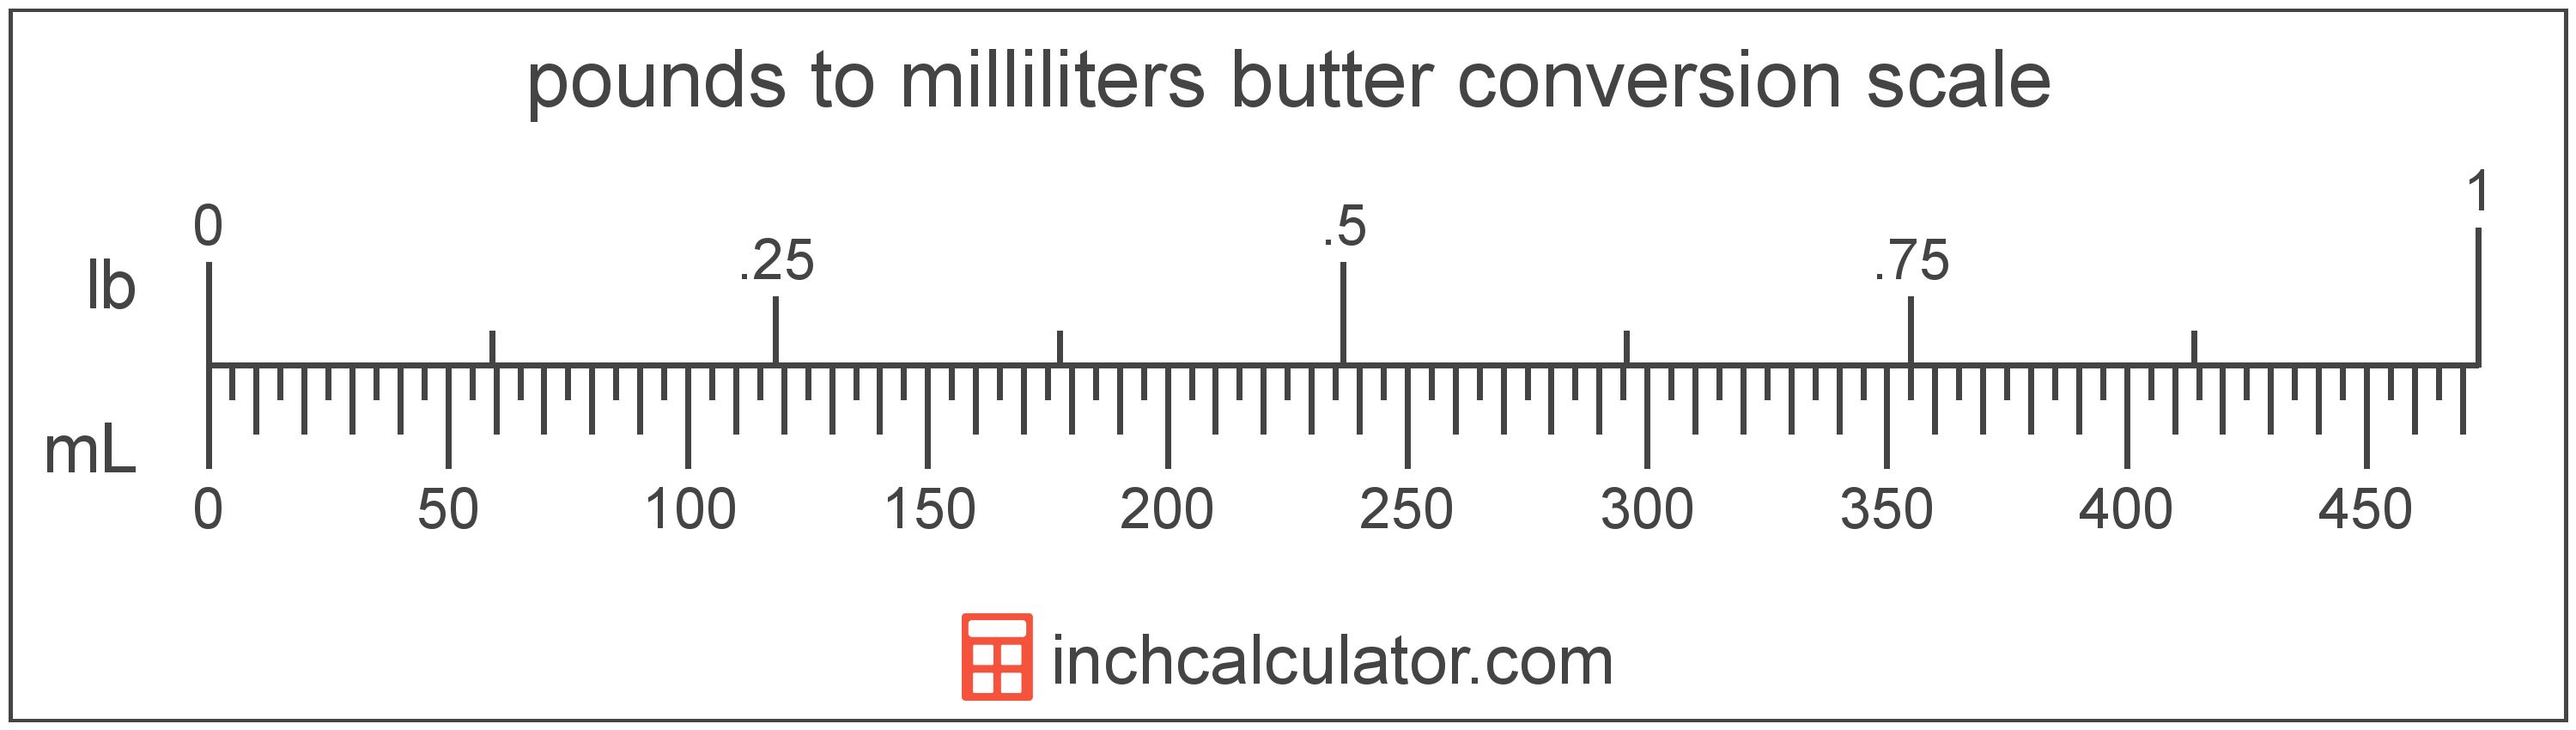 conversion scale showing pounds and equivalent milliliters butter values